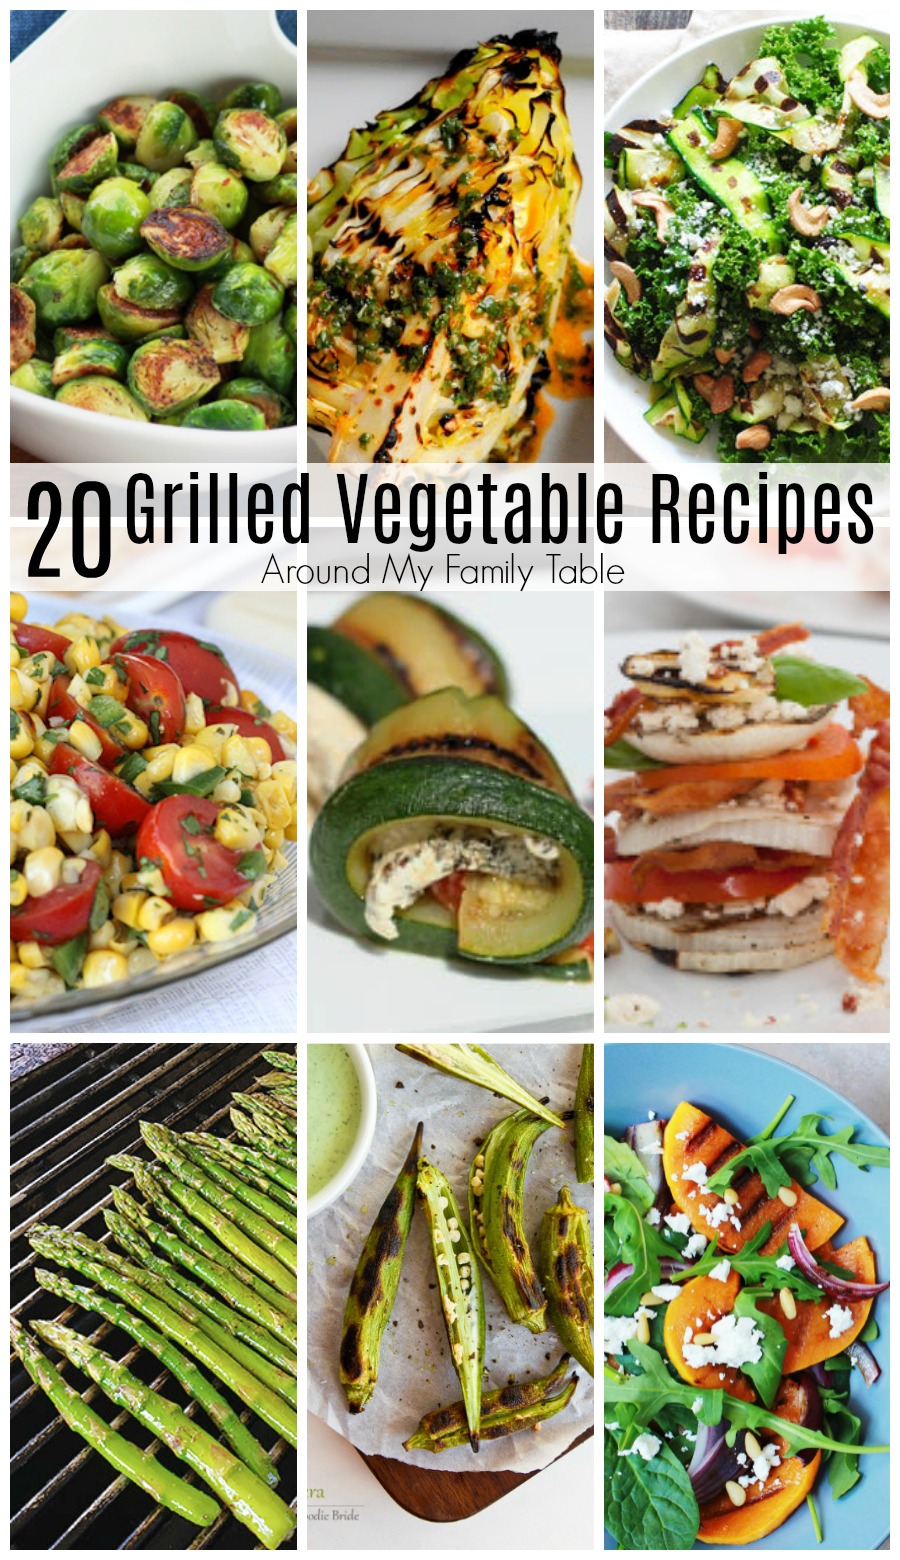 Light up your backyard grill!  These 20 Grilled Vegetable Recipes are the perfect addition to your summer menu.  